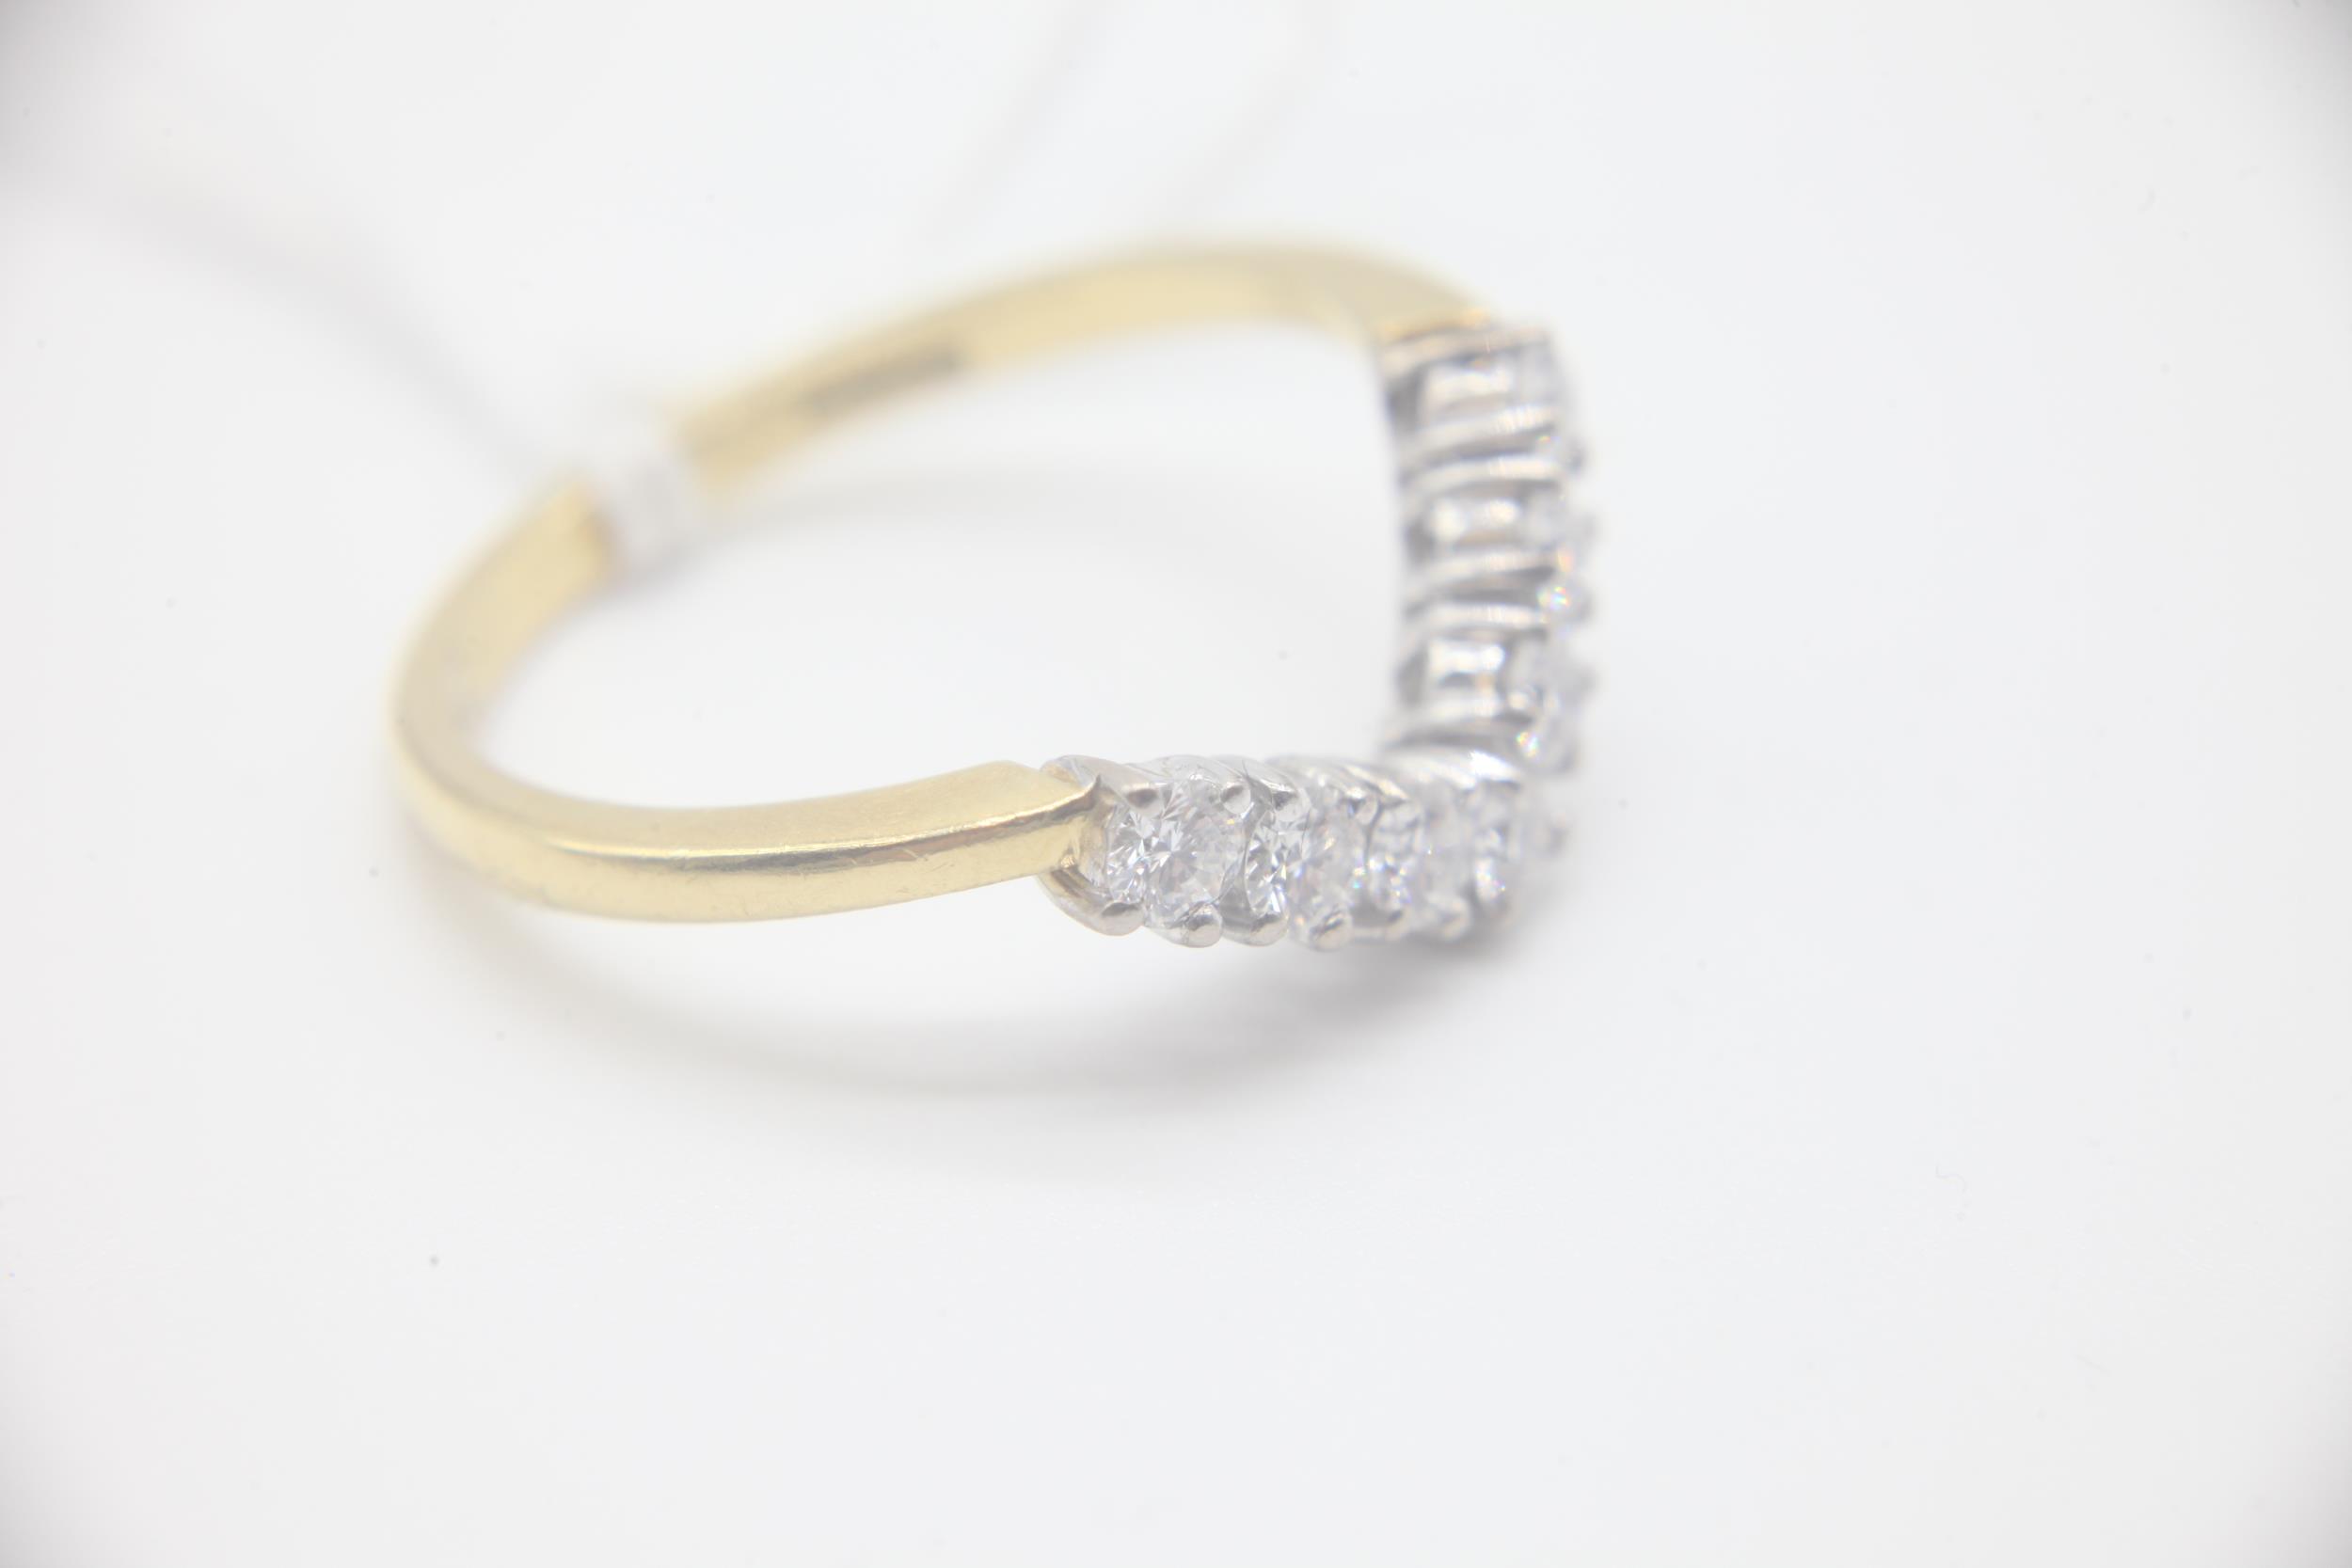 Fine 18ct Gold and Diamond Wishbone Ring Fully hallmarked for 18ct Gold with a London Assay Office - Image 2 of 5